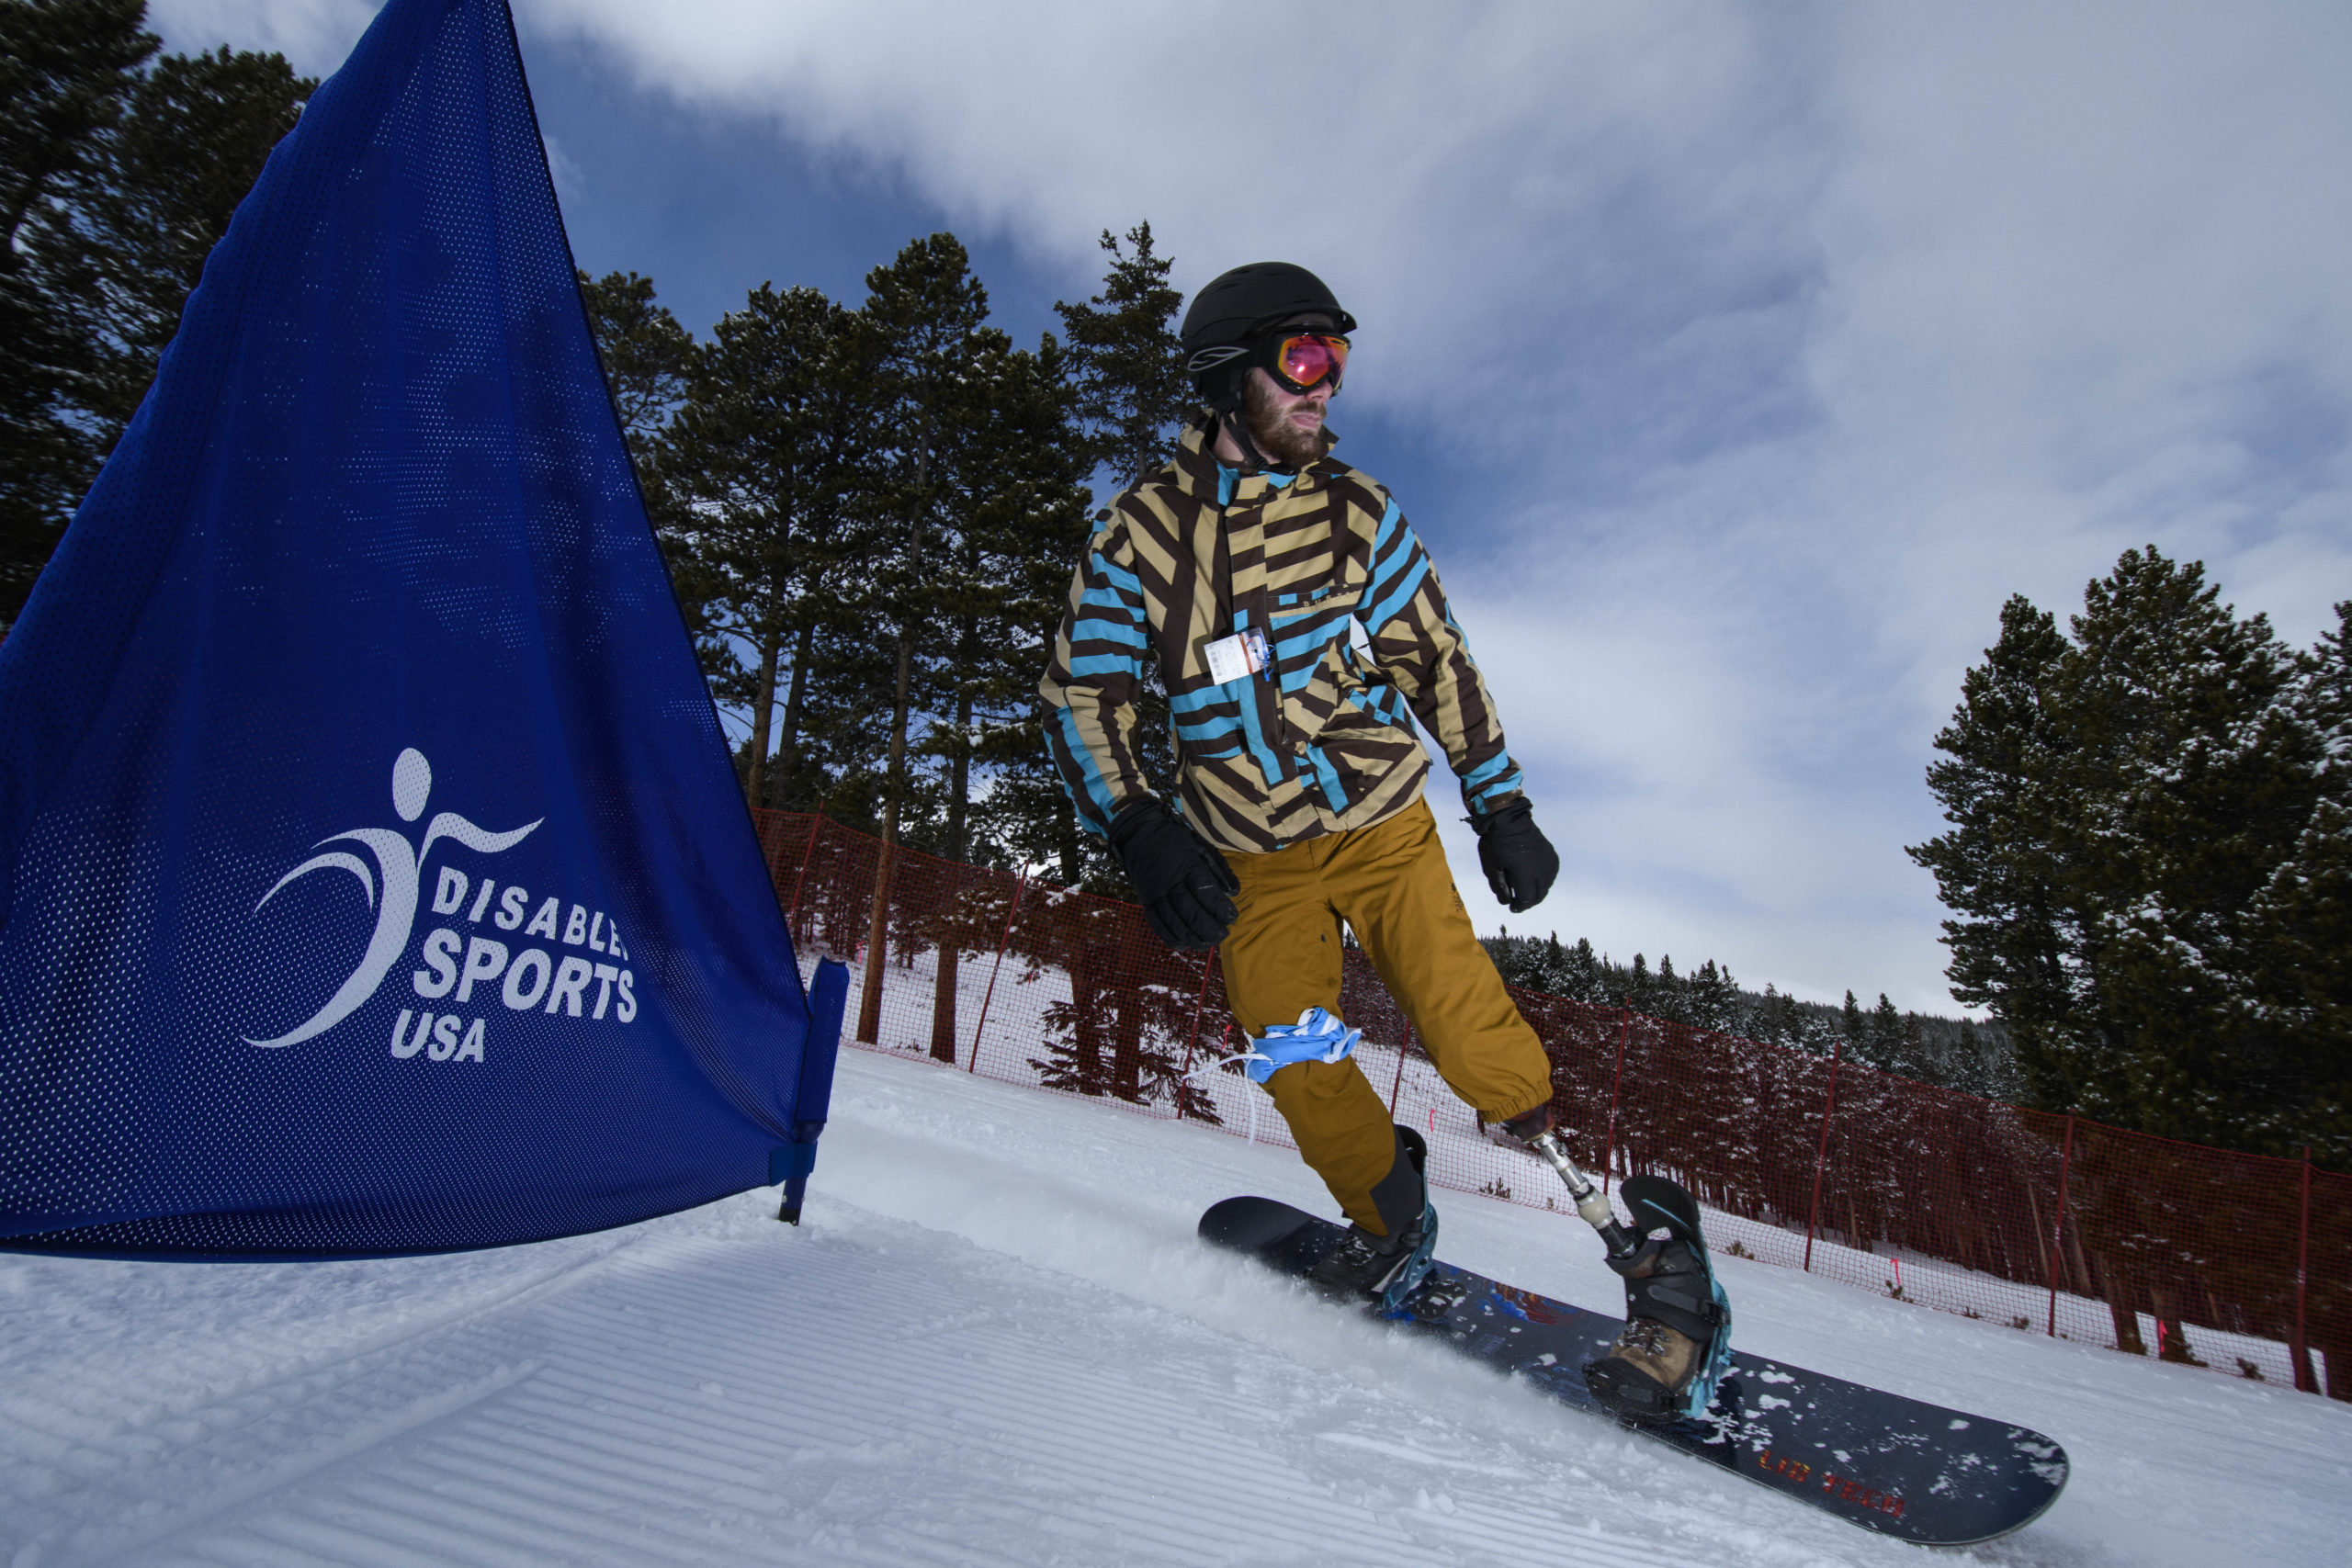 Male athlete with a left leg below the knee amputation skiing down hill past a banner